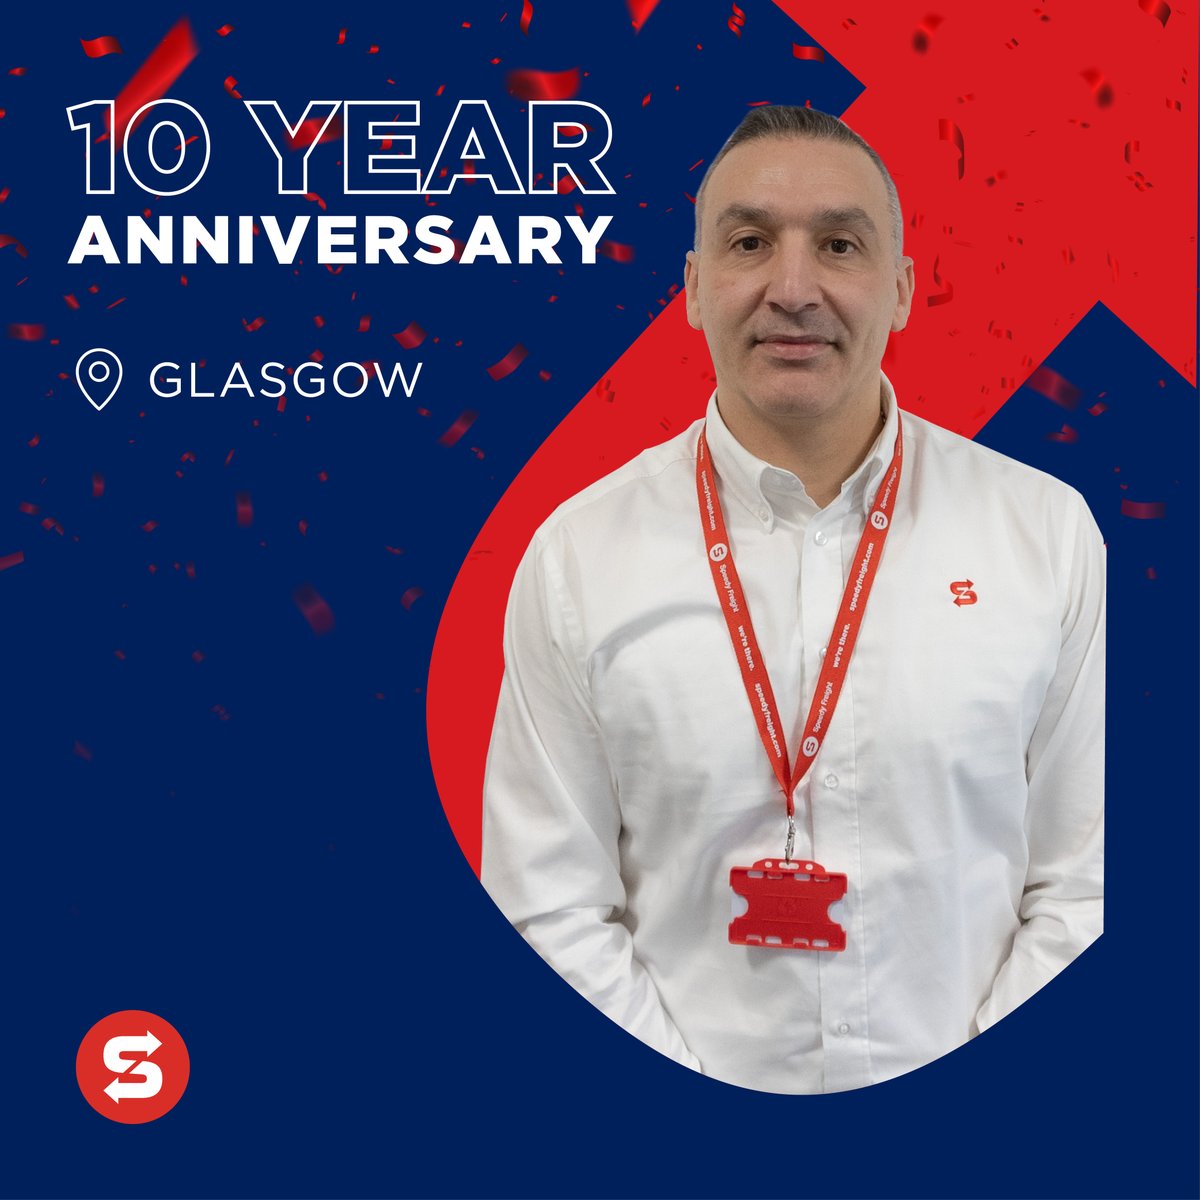 Congratulations to Damian Pacitti and his team in Glasgow as they mark 10 years as a Speedy Freight Franchise! 🎉 #SpeedyFreight #Logistics #Franchise